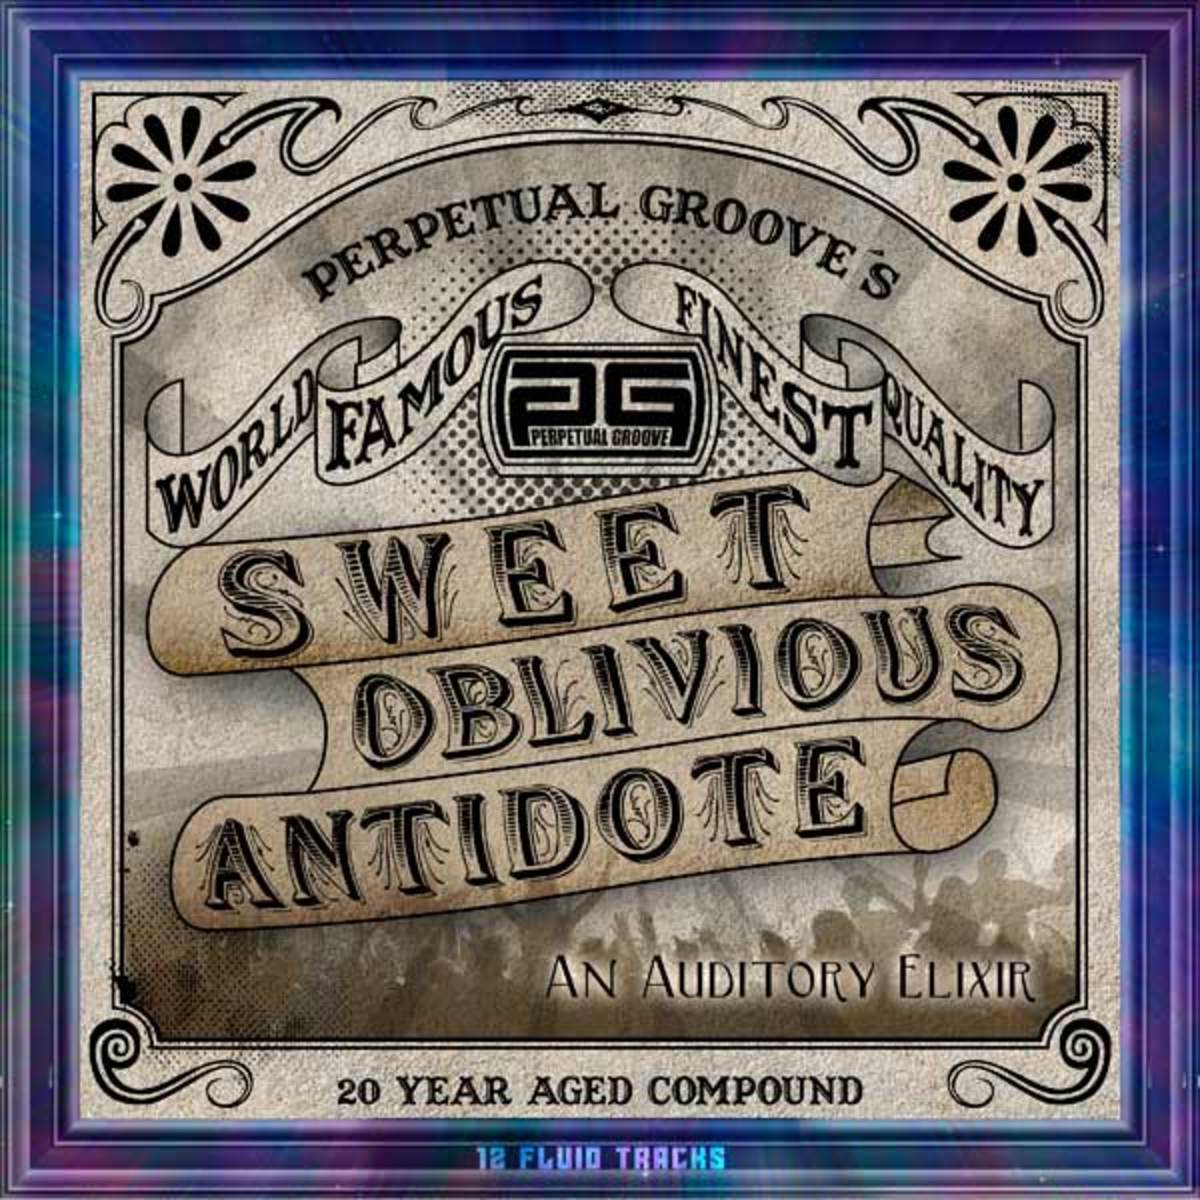 Sweet Oblivious Antidote cover